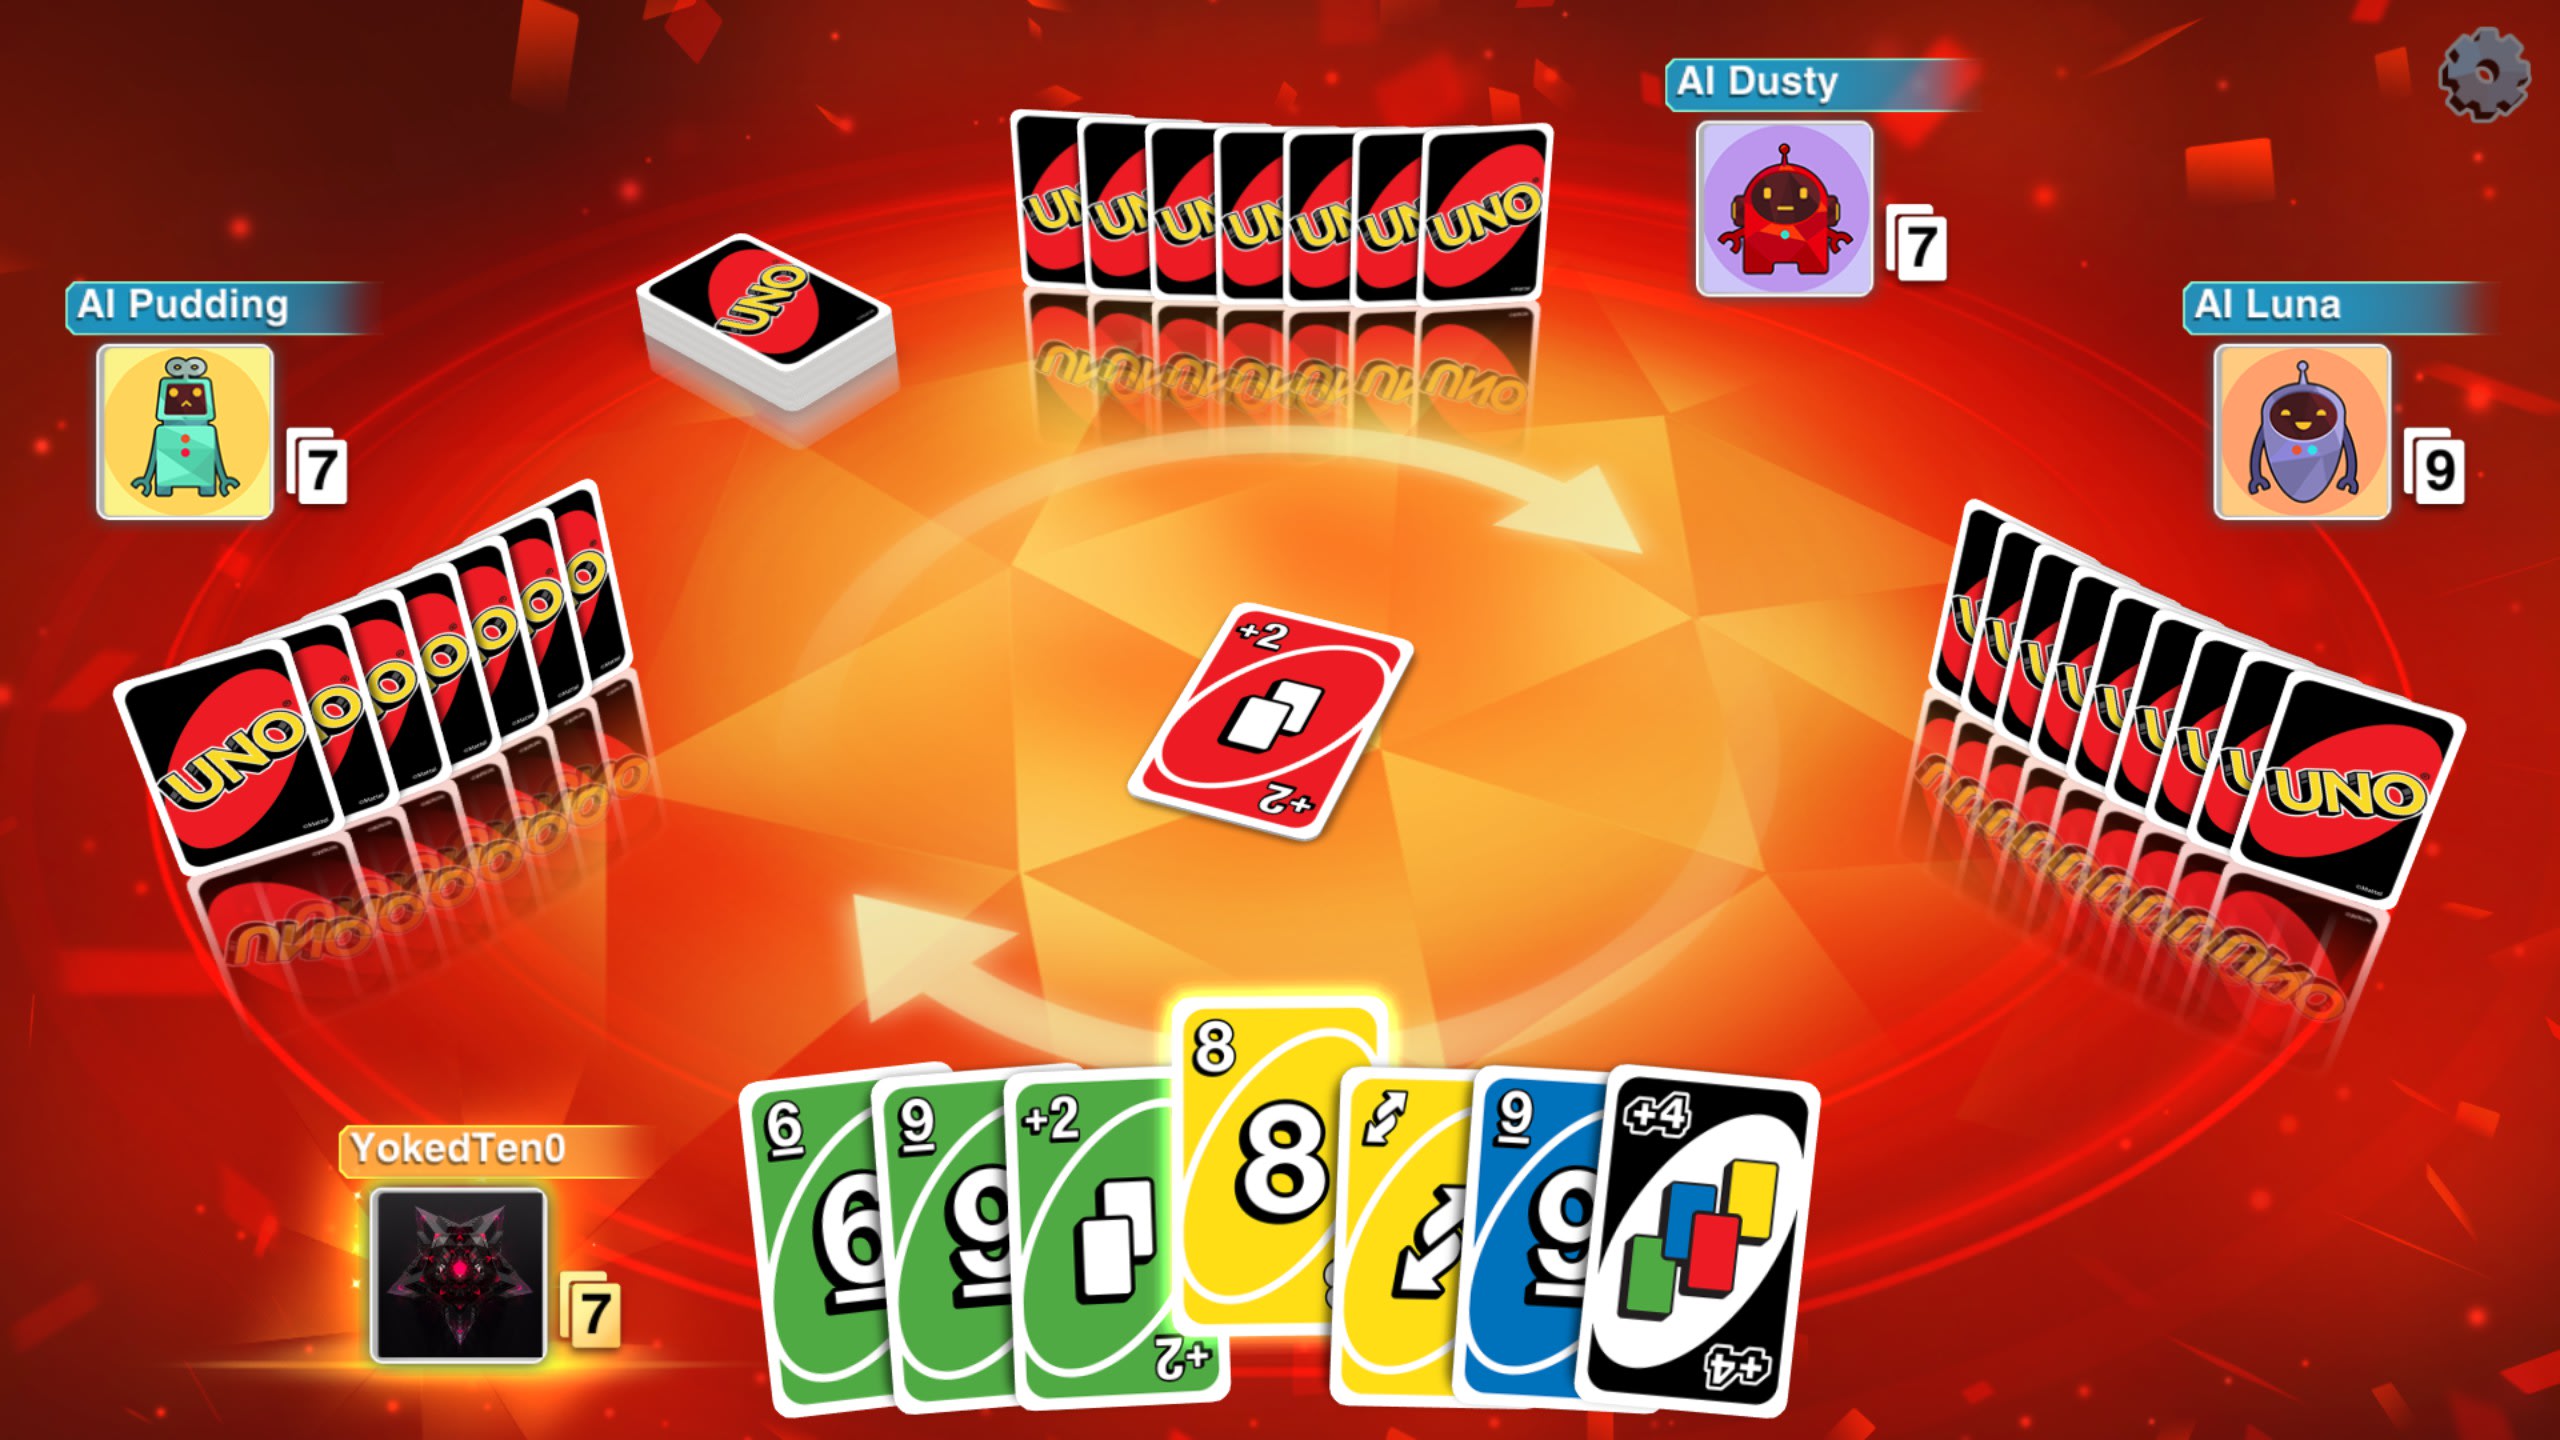 Play Uno With You On Steam By Yokedten0